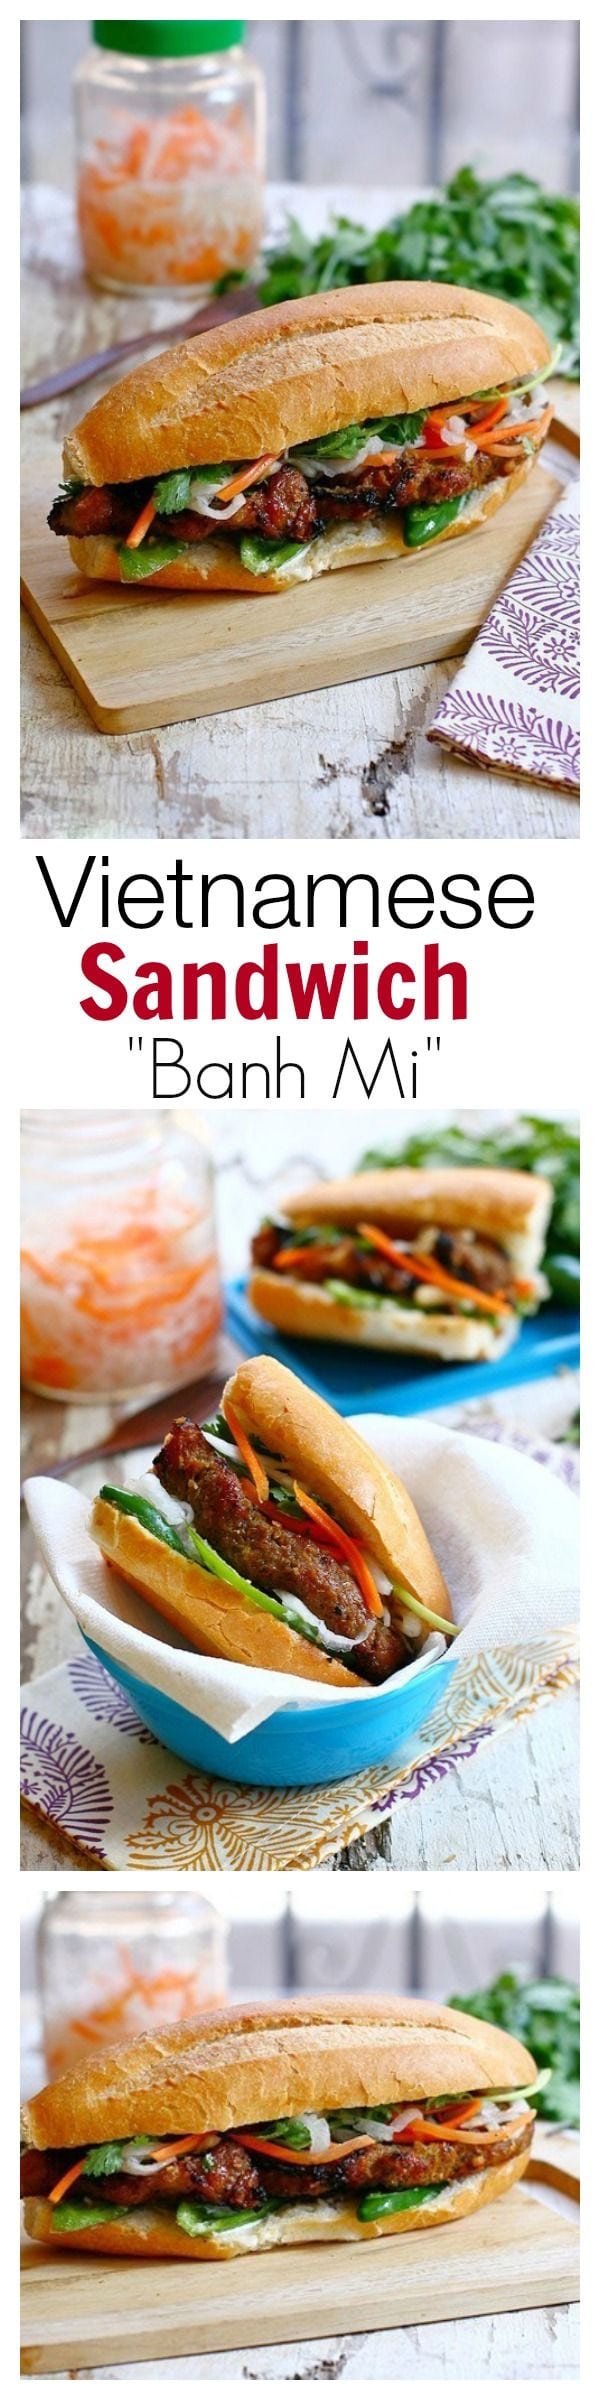 Banh Mi is Vietnamese baguette with grilled meat. Easy banh mi recipe with grilled lemongrass pork and baguette to make the perfect banh mi at home. | rasamalaysia.com